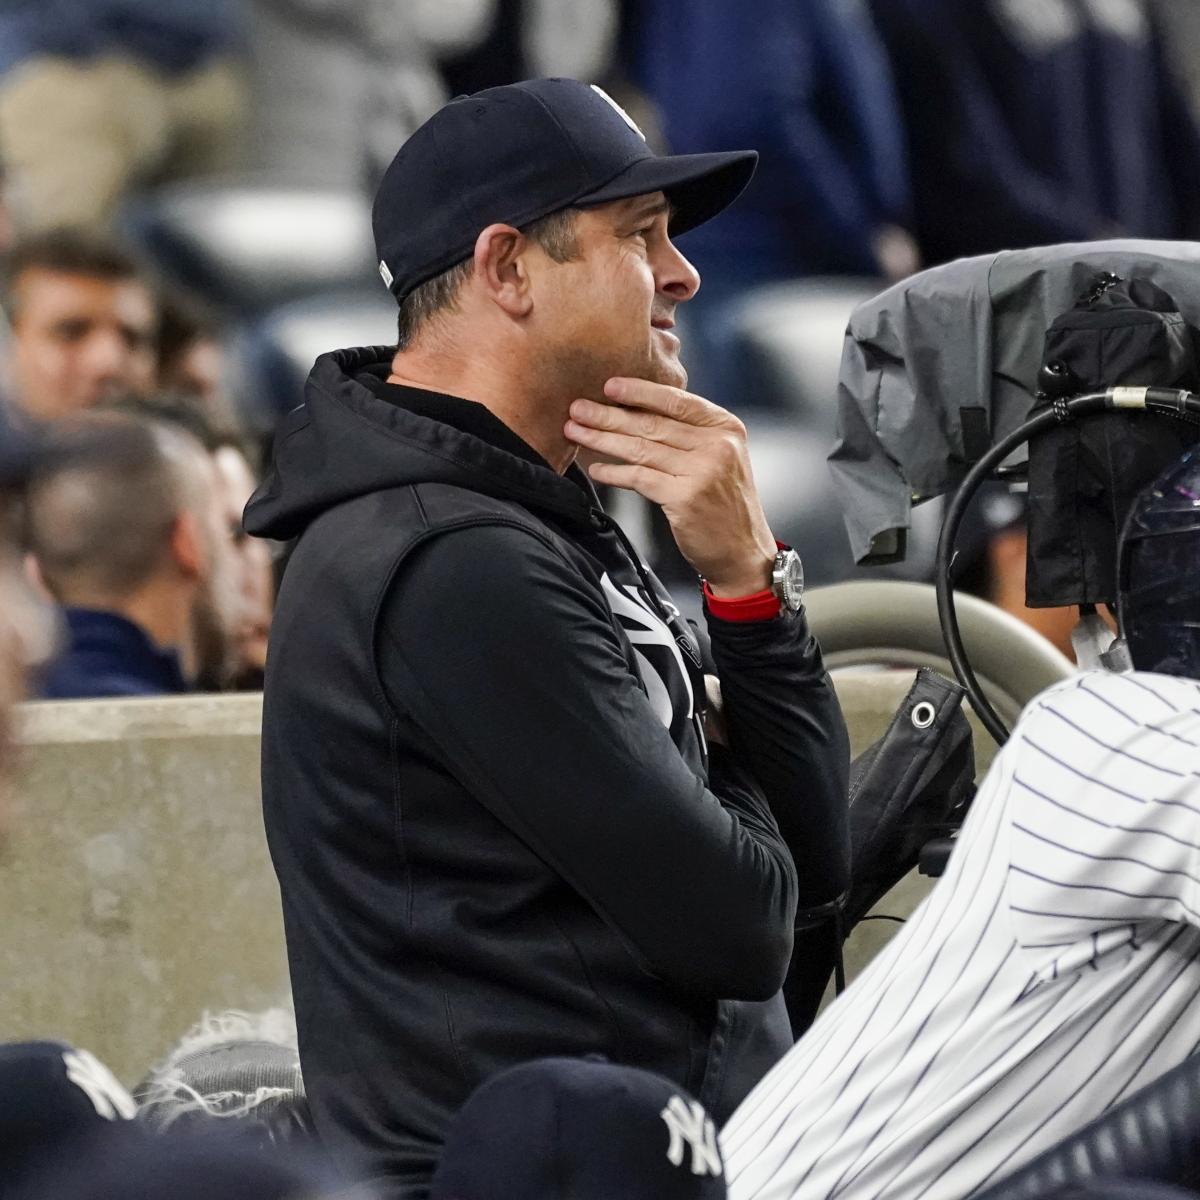 Yankees Fans Need to Stop Blaming Aaron Boone and Shift Anger to Front Office